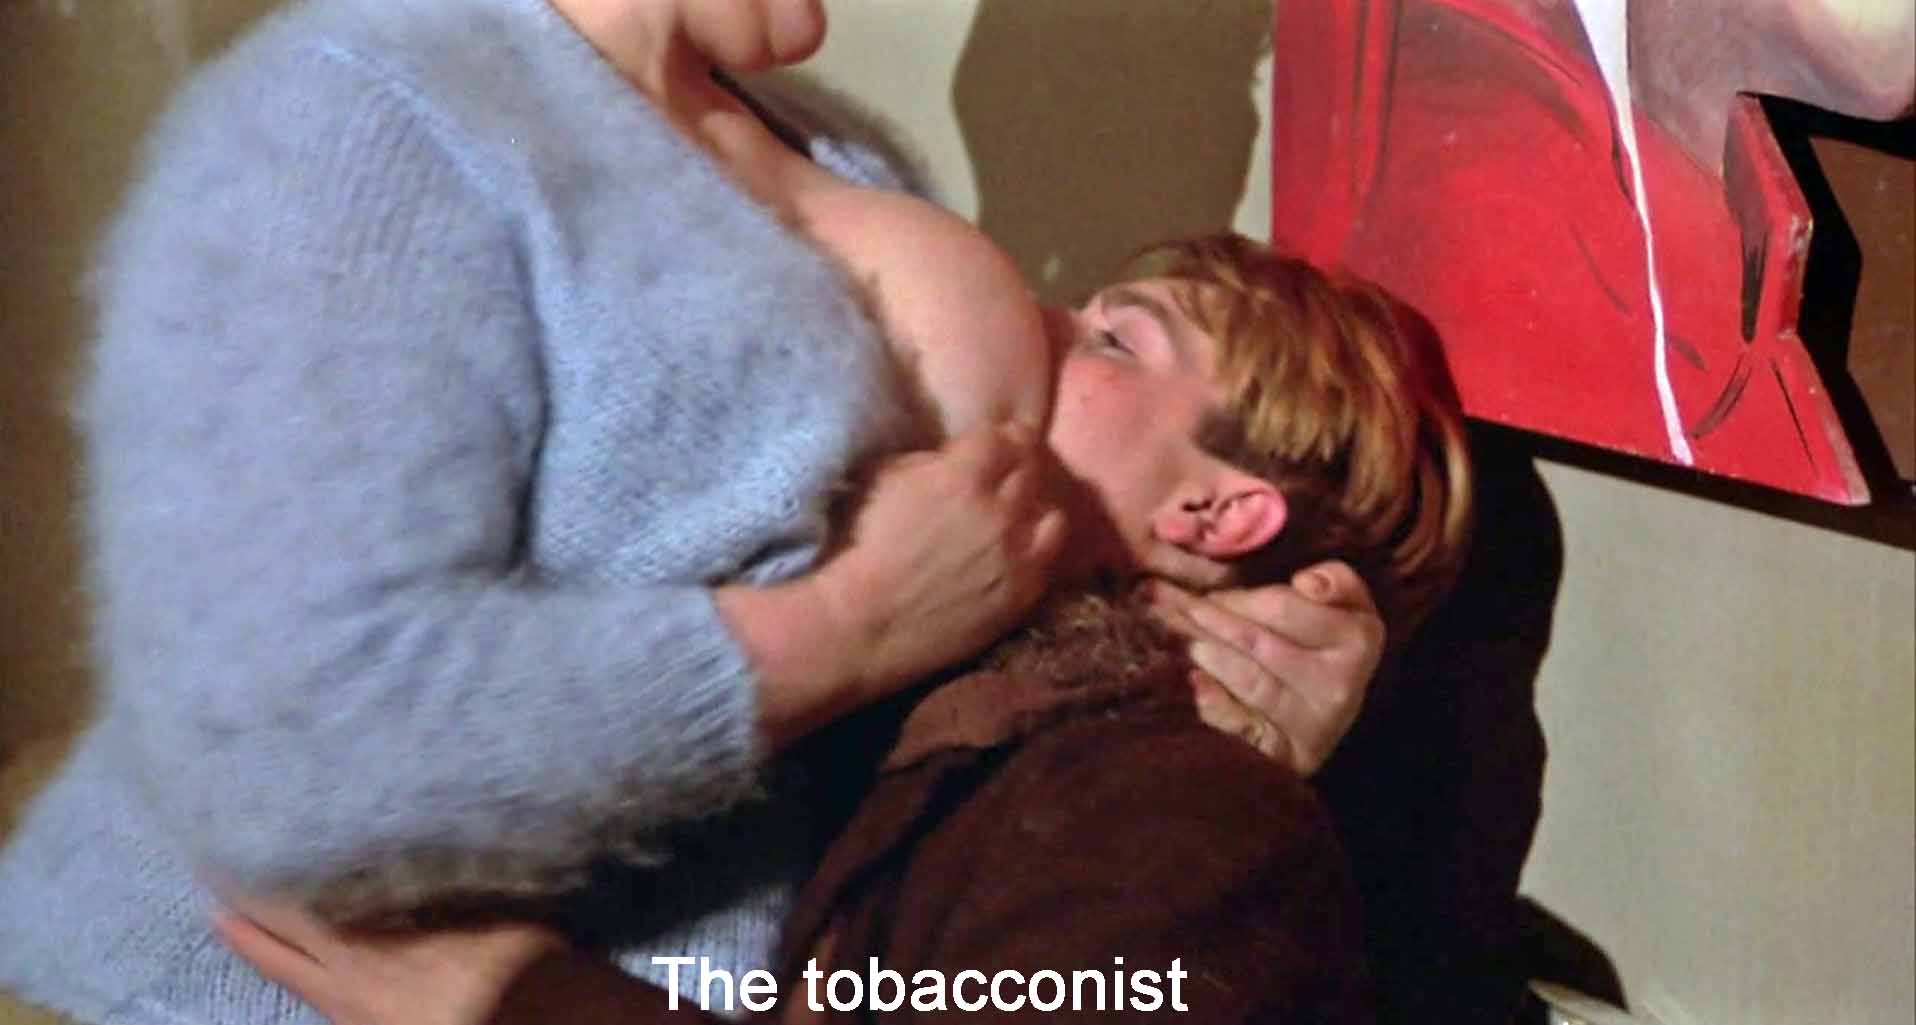 The tabacconist